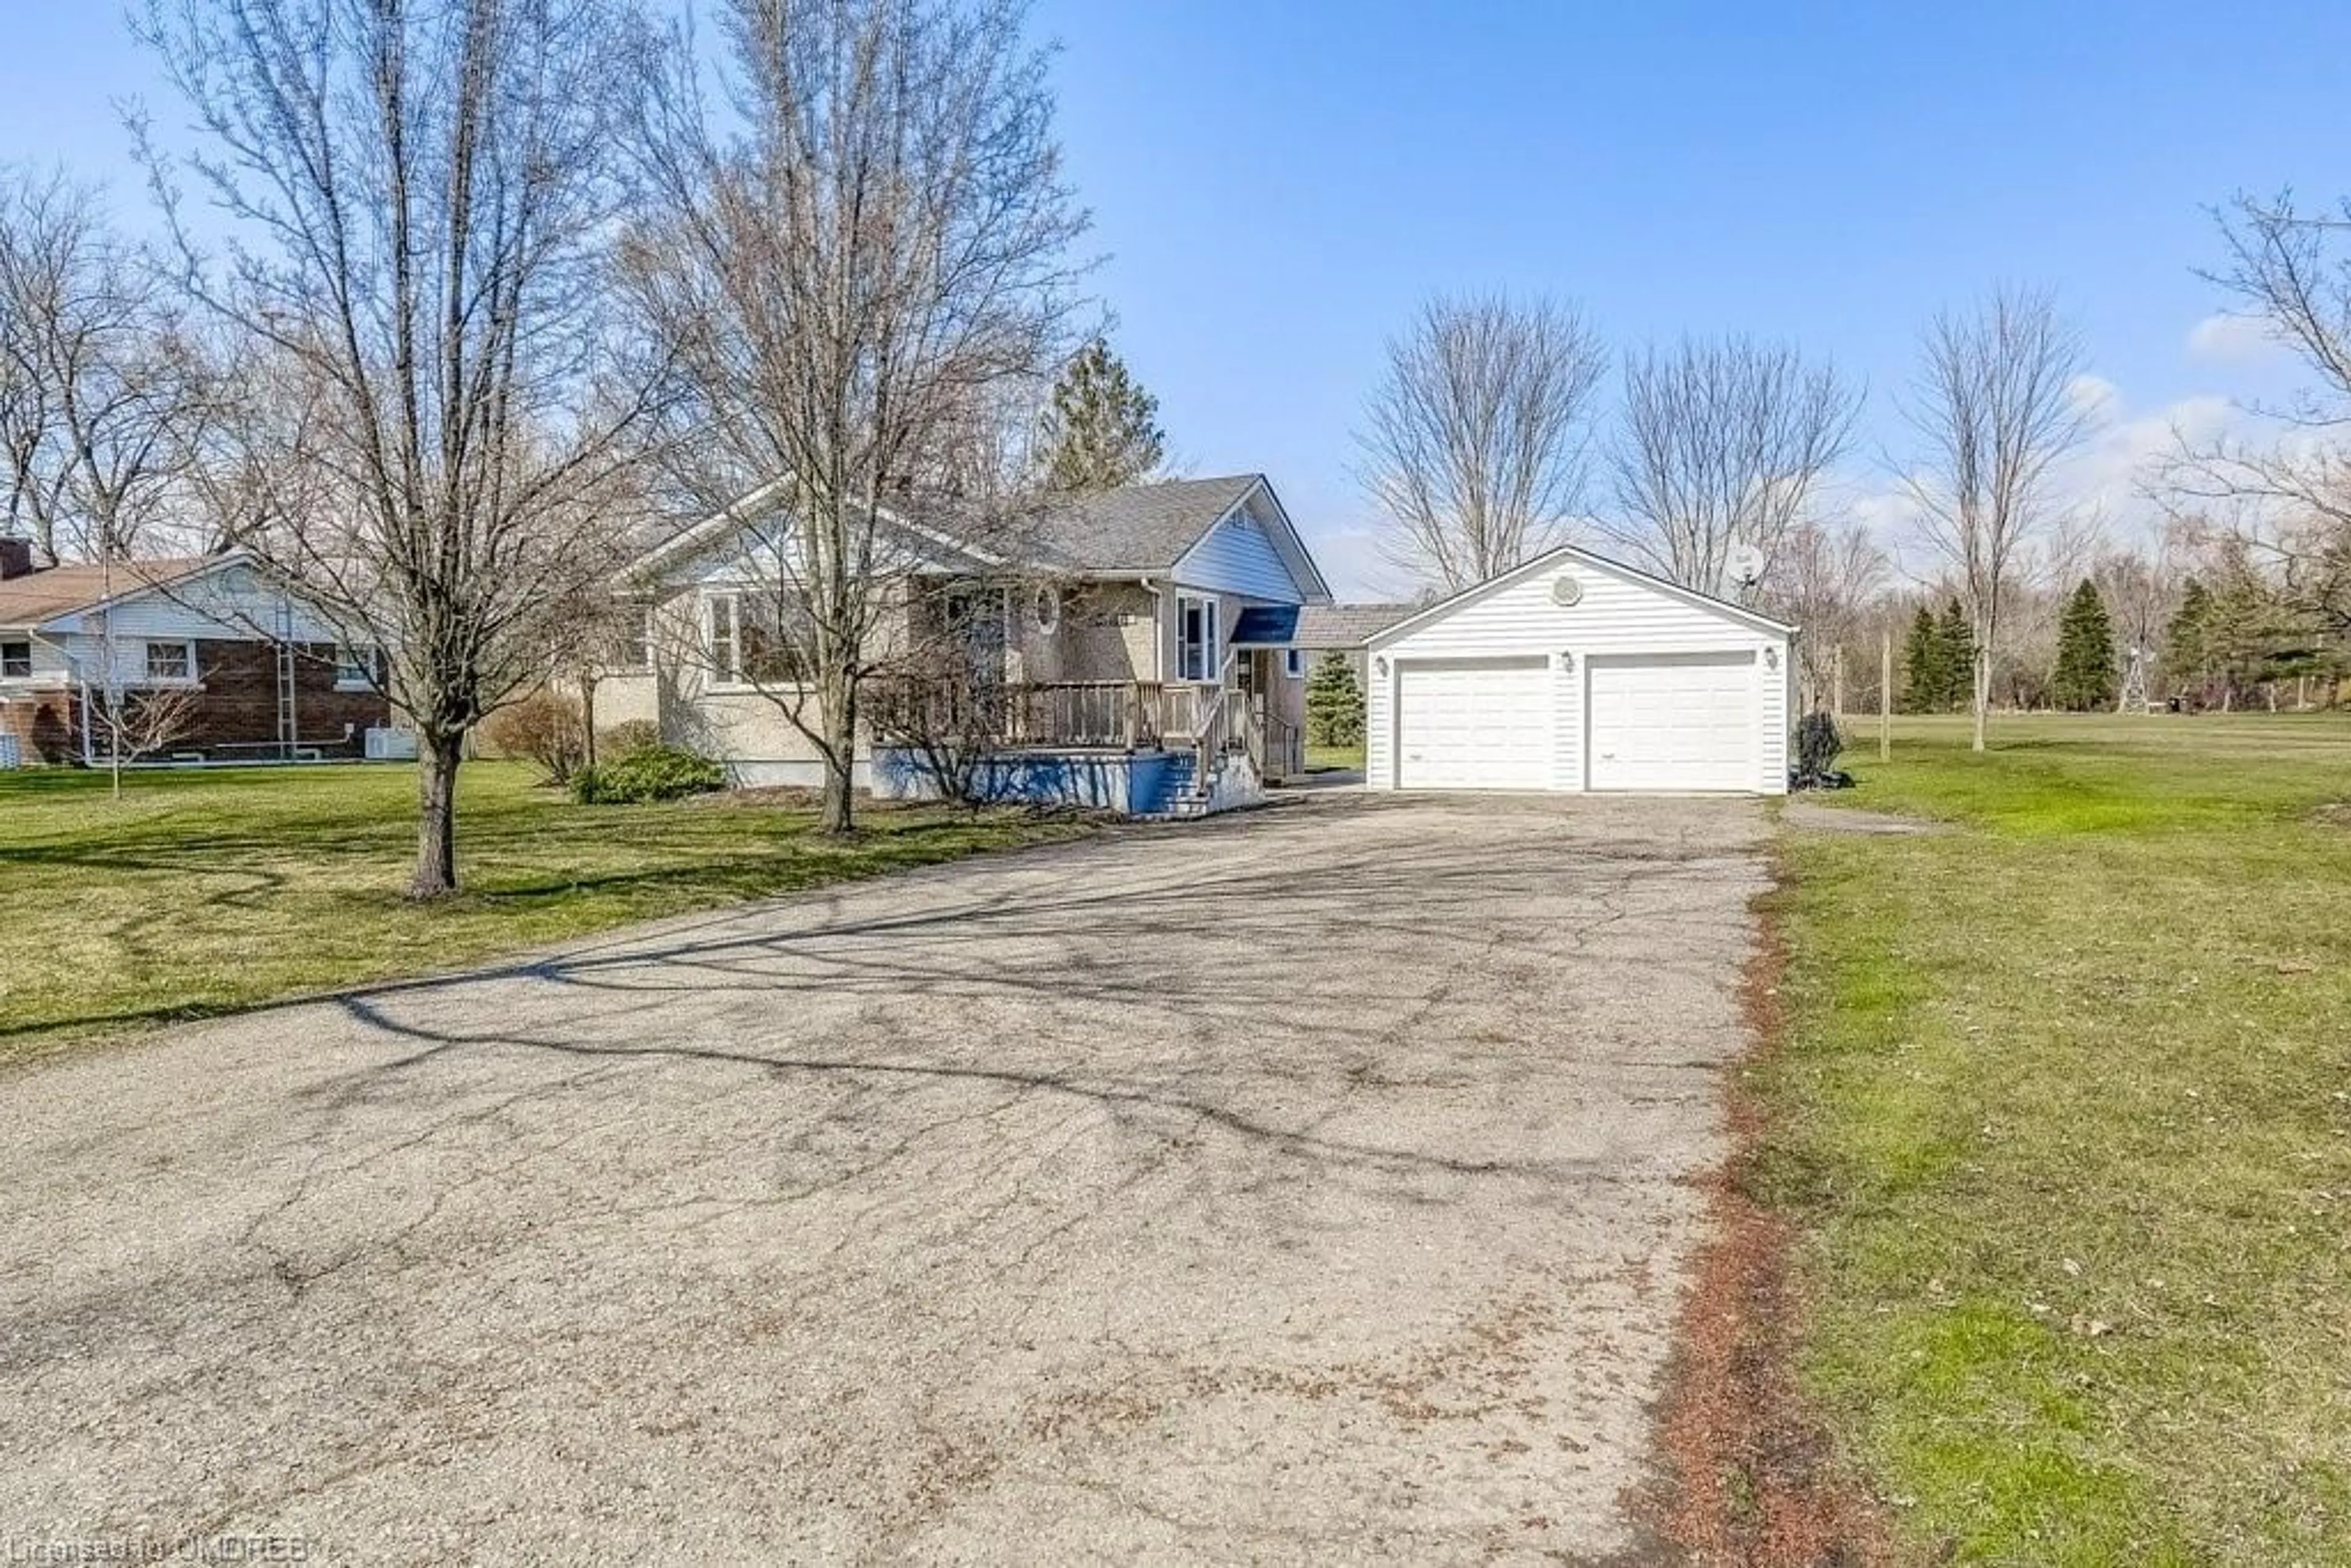 Frontside or backside of a home for 5688 Sherkston Rd, Port Colborne Ontario L0S 1R0